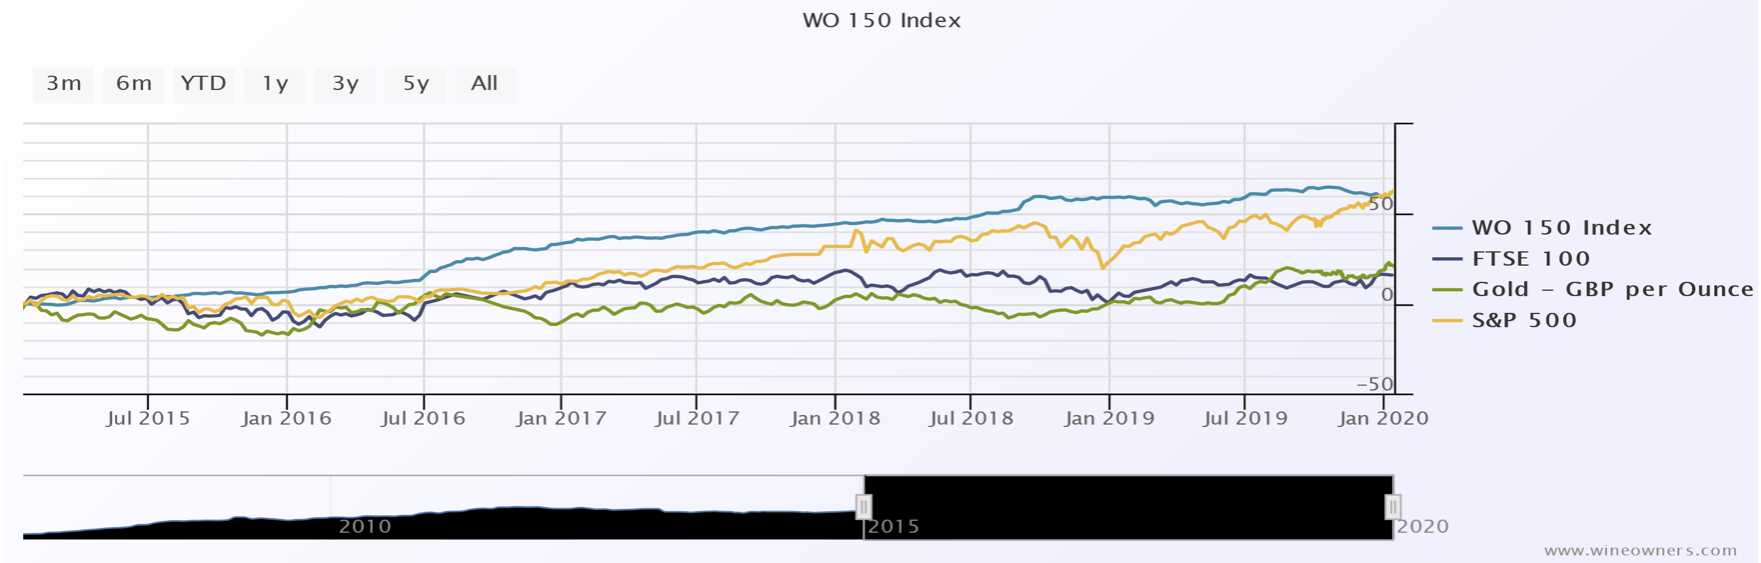 WO 150 Index Wine Owners Investment Report